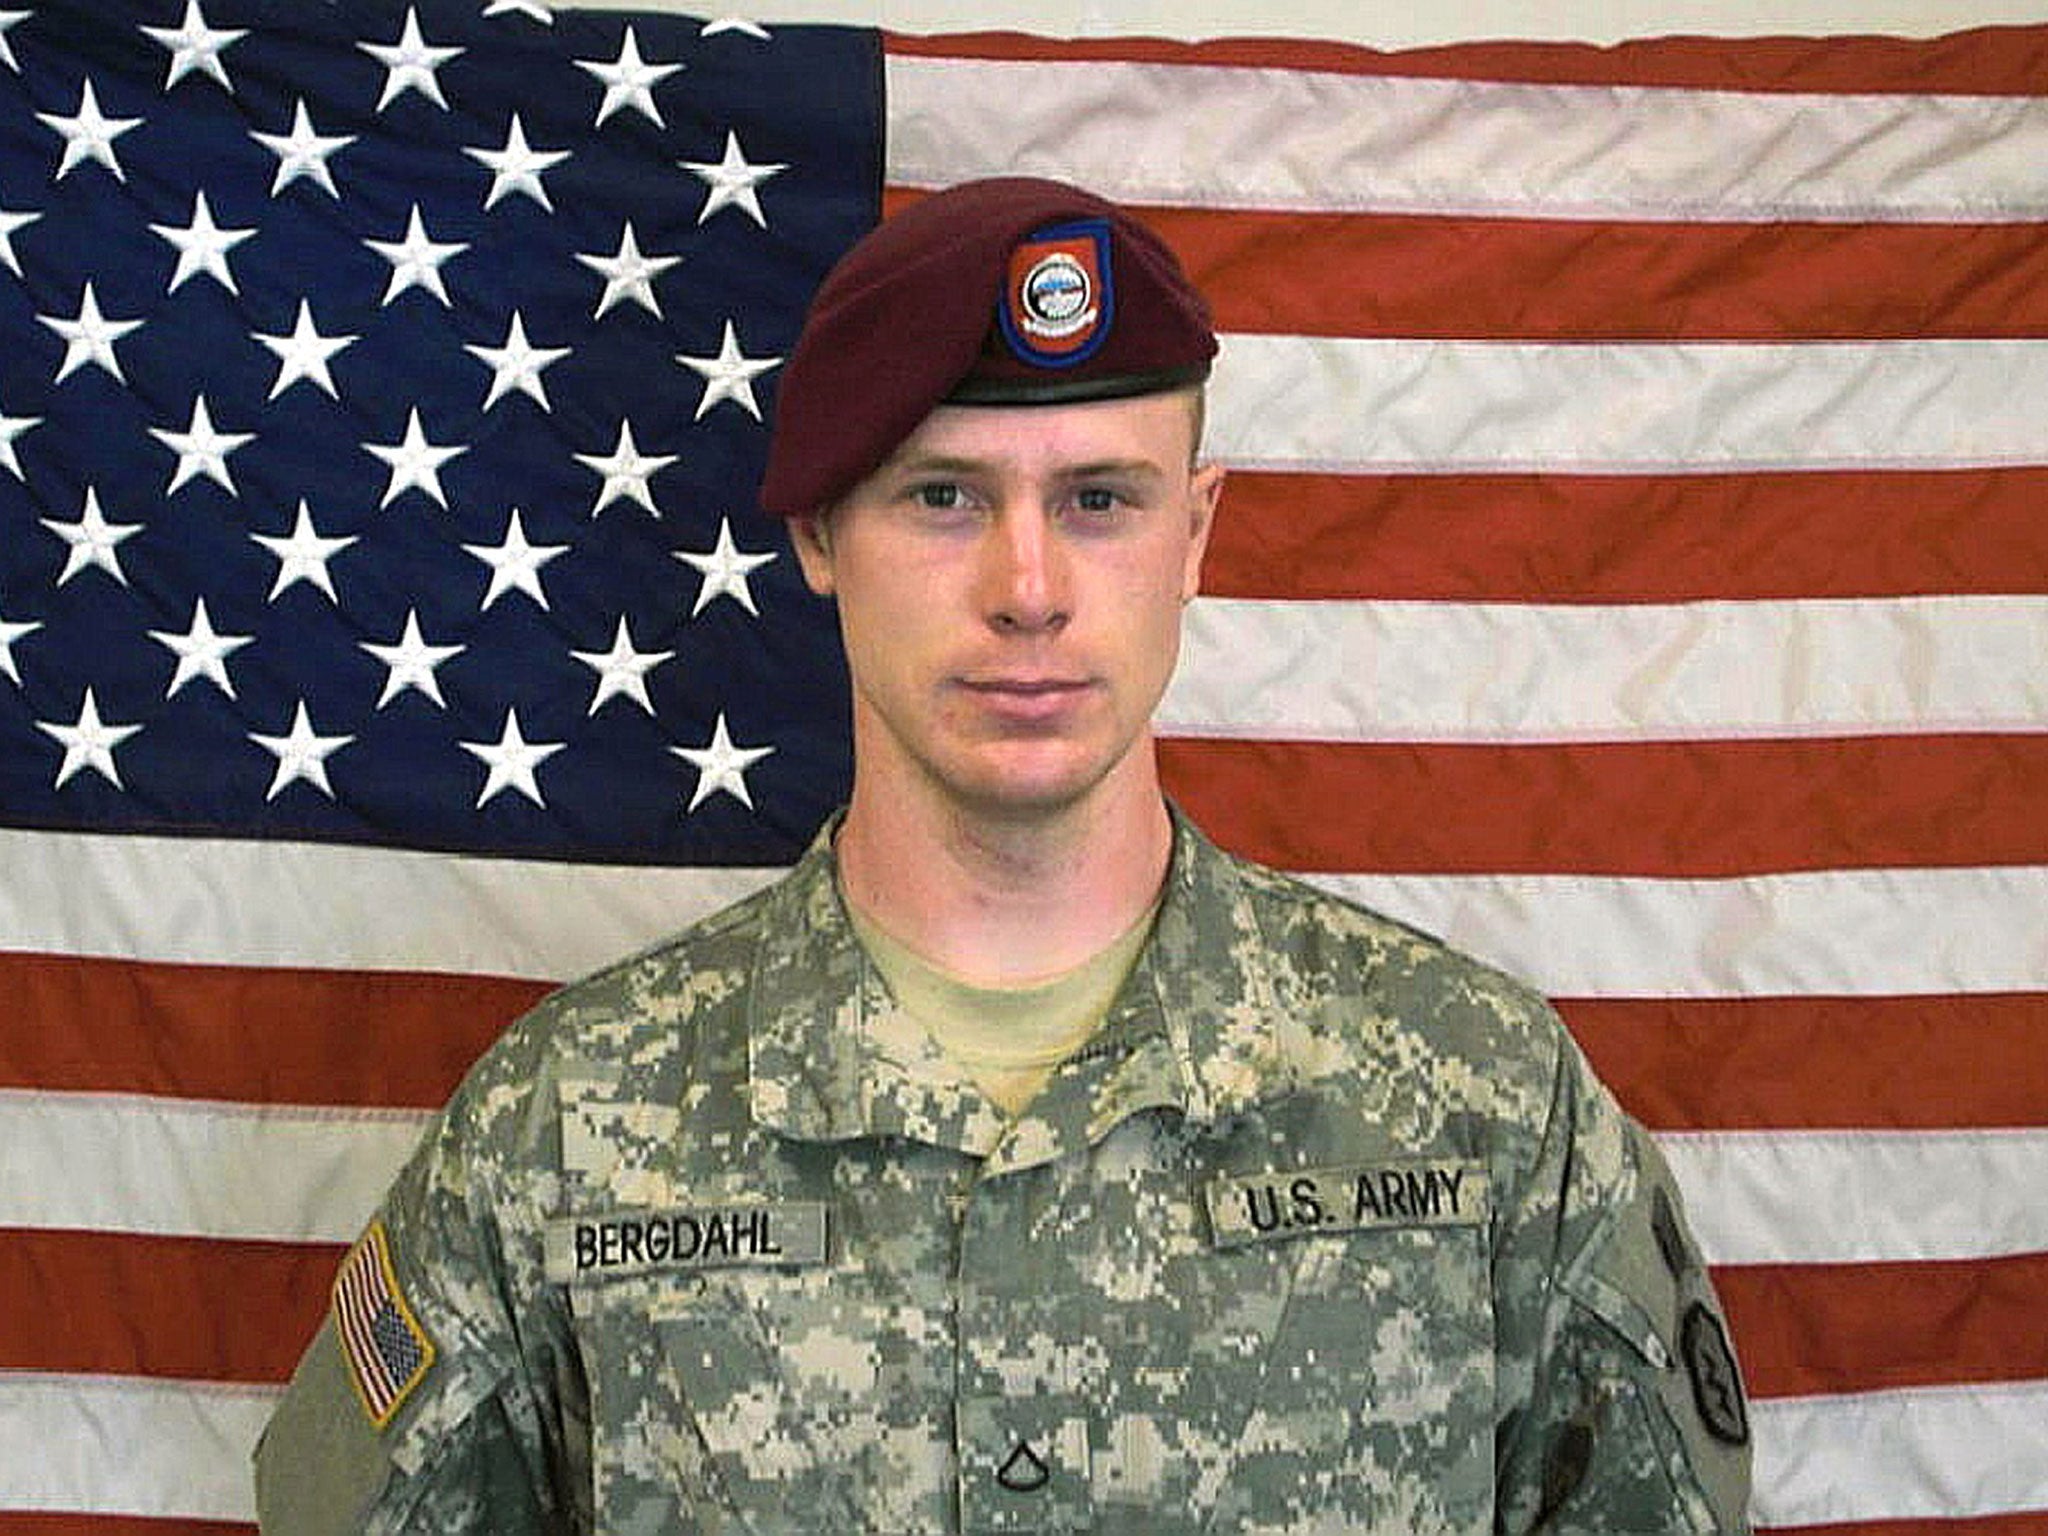 Sergeant Bowe Bergdahl vanished from his post in Afghanistan in June 2009